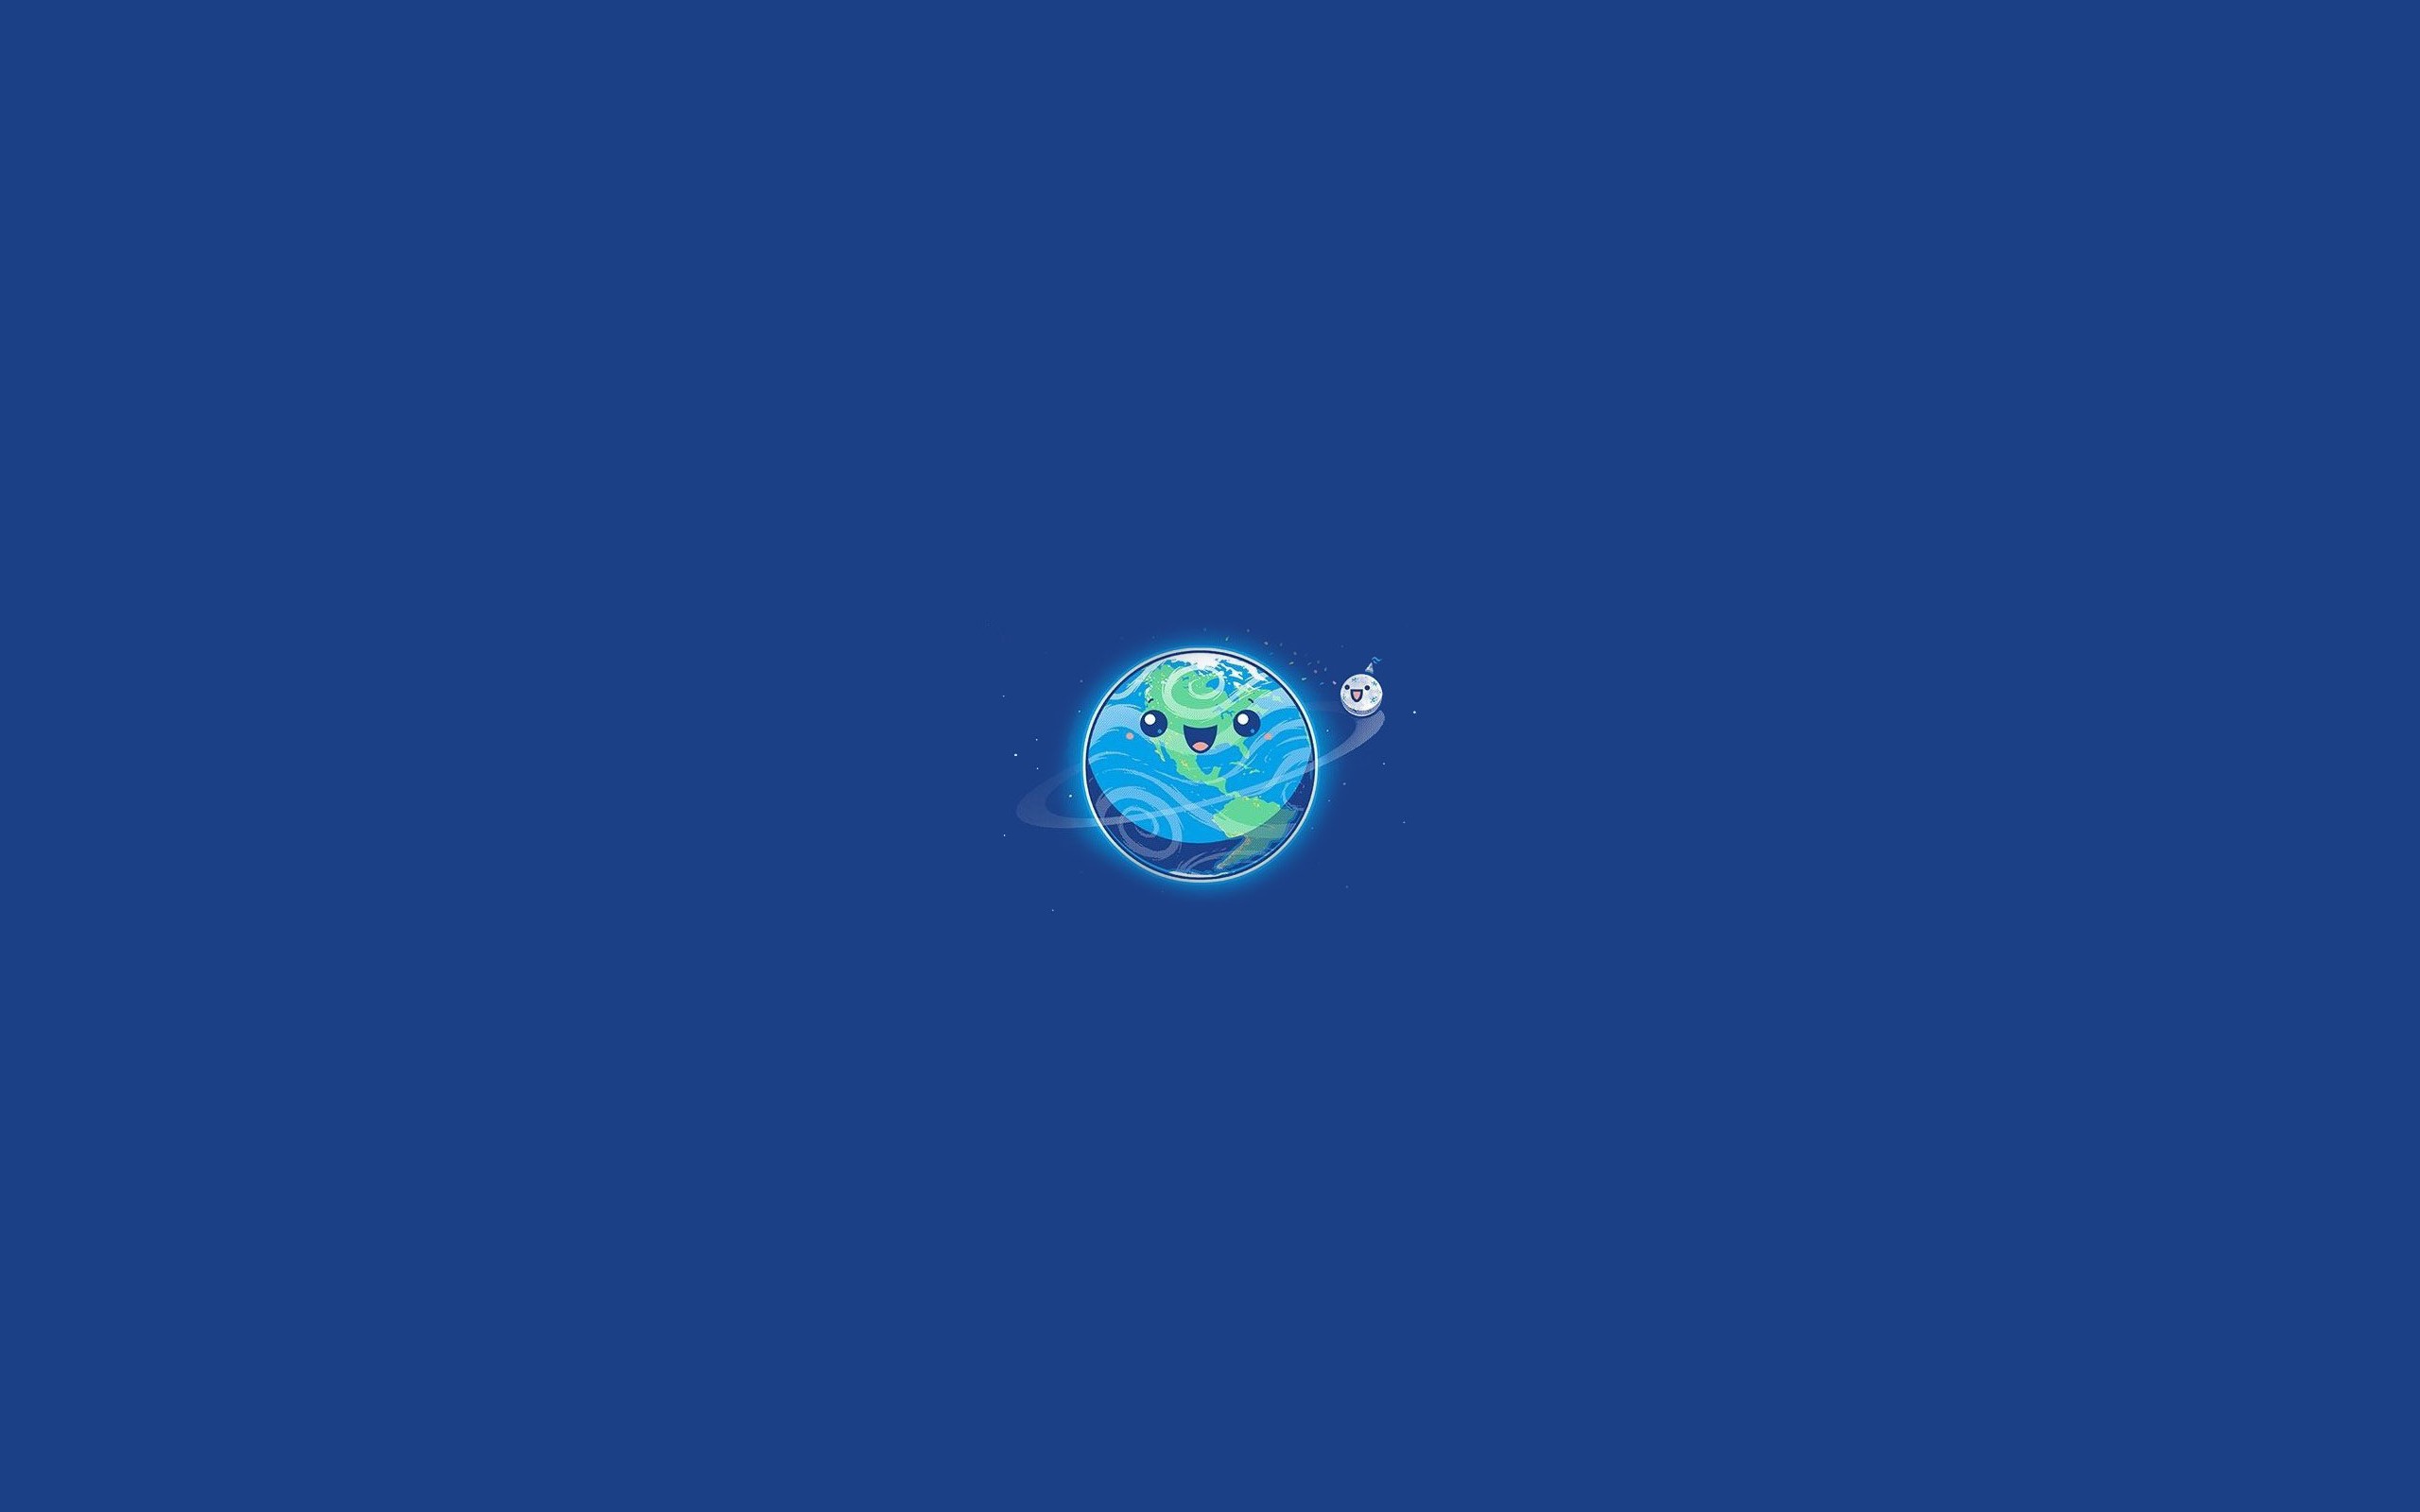 General 2560x1600 minimalism Earth Moon planet space space art simple background artwork